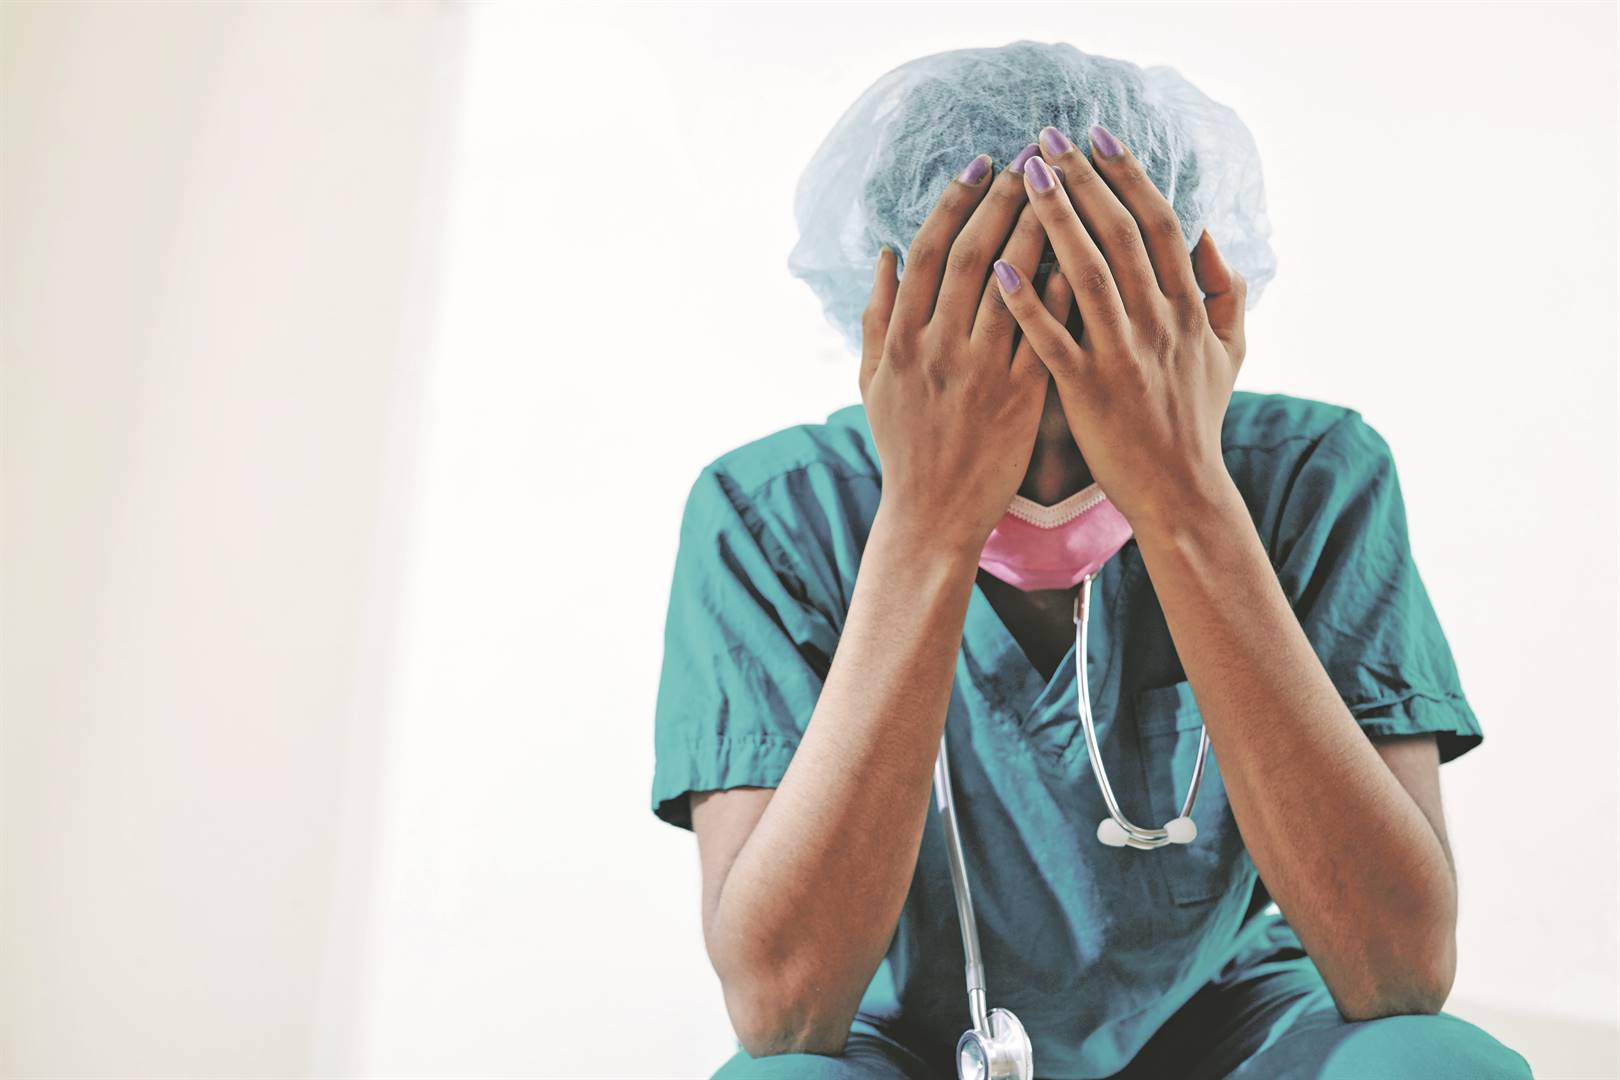 A shortage of nurses is expected to affect the country's healthcare sector. Photo: Dragon Images